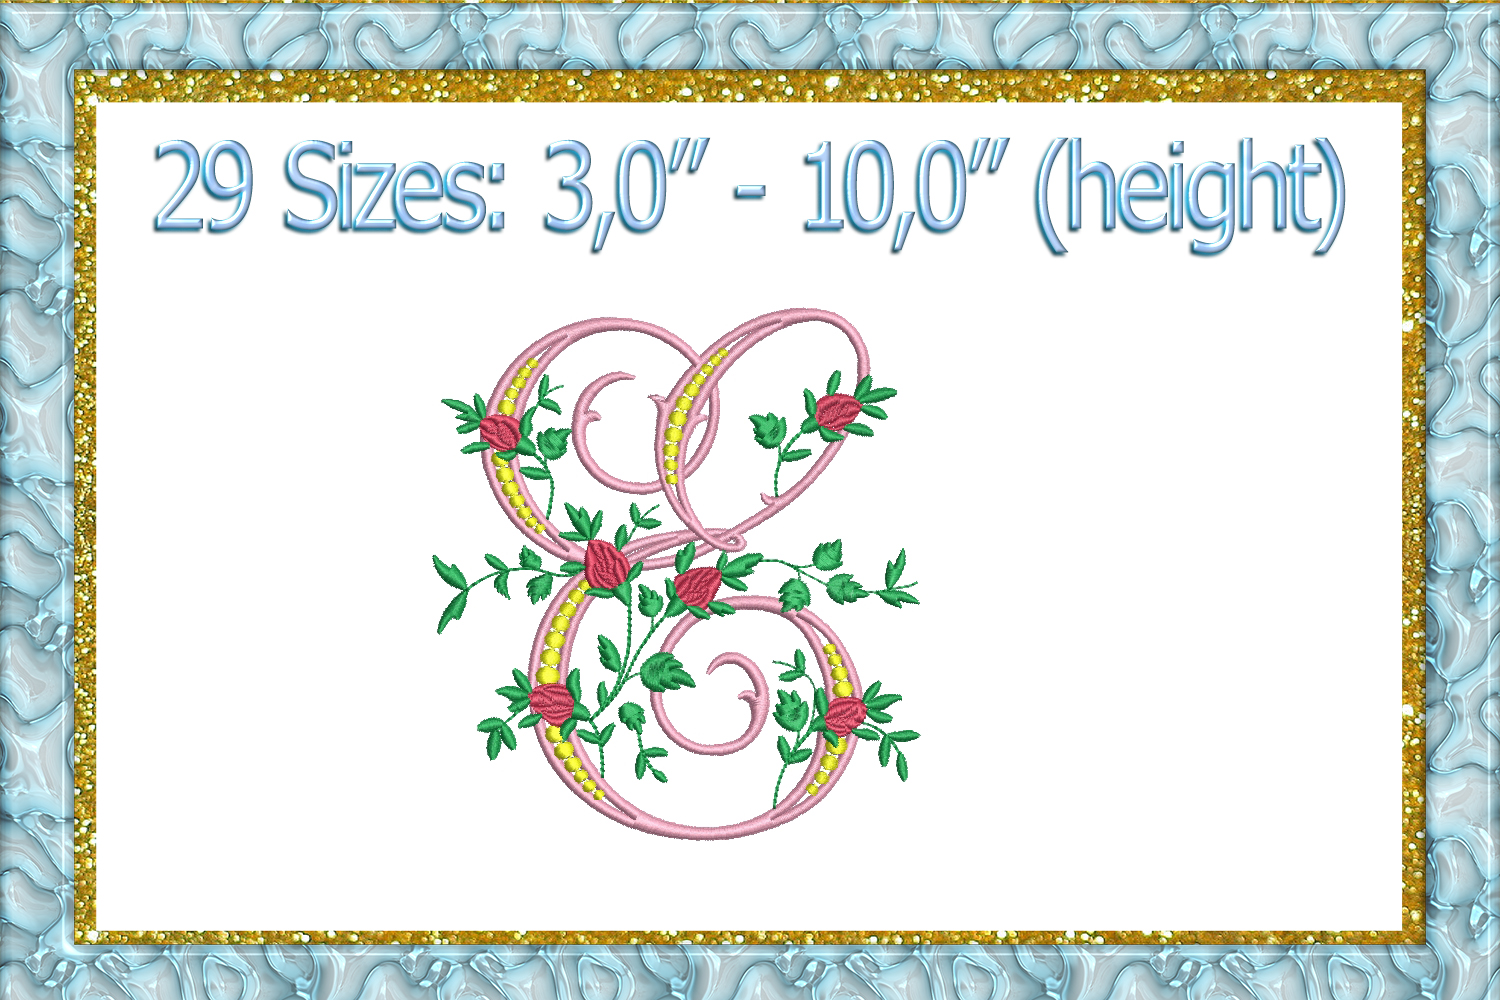 Chanel logo embroidery design - pattern for embroidery machine